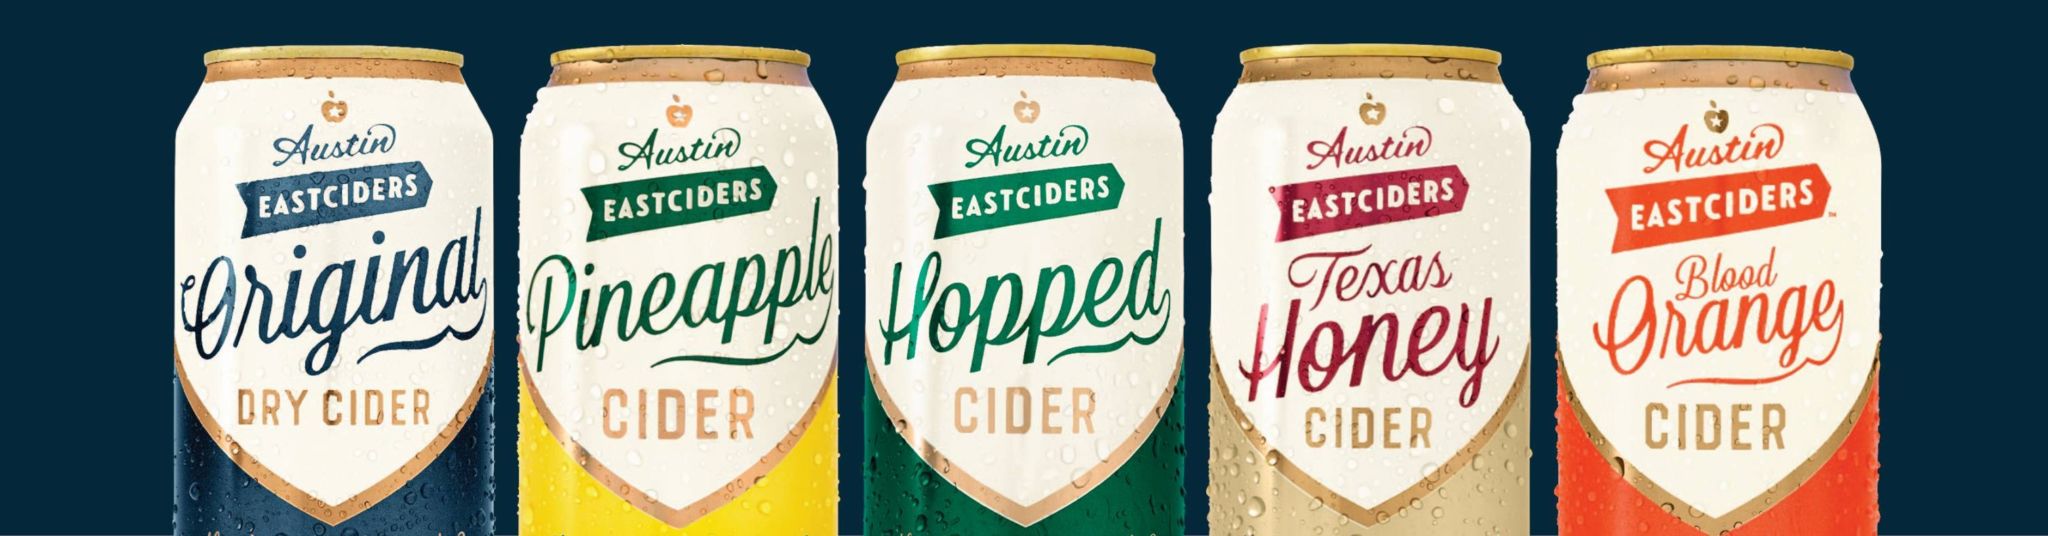 austin eastciders ruby red grapefruit carbs